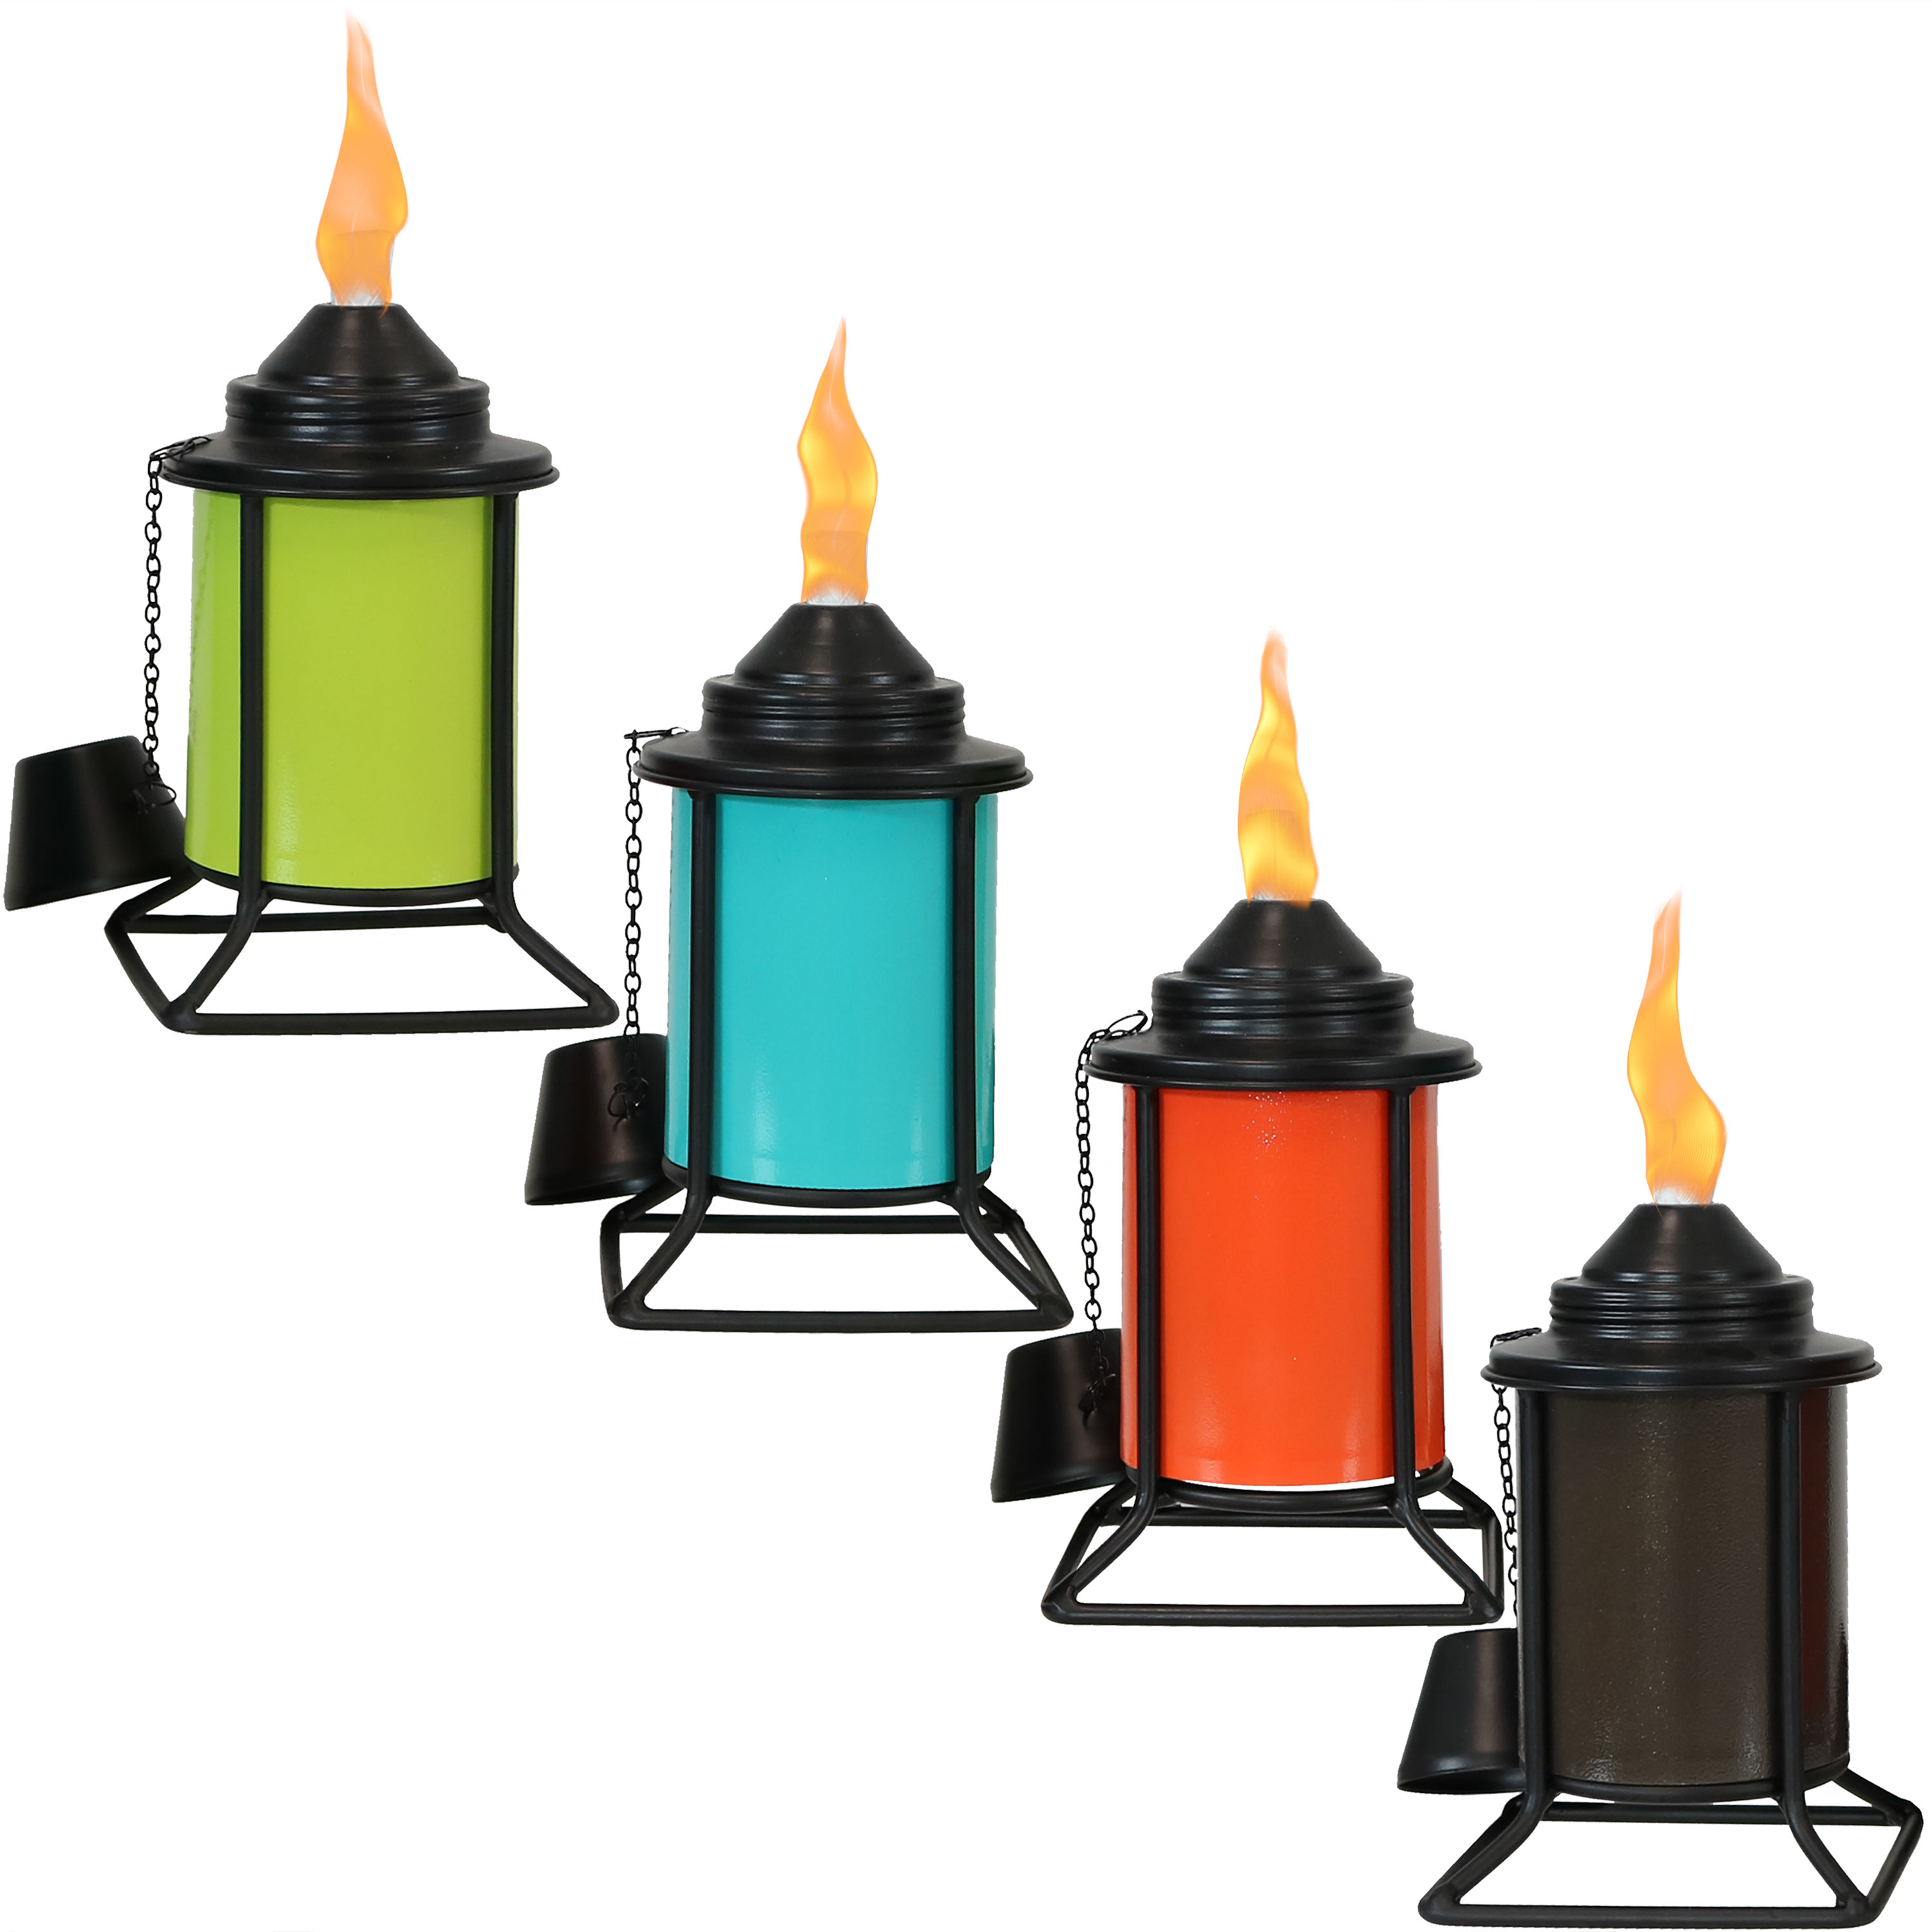 Metal Square Outdoor Tabletop Torches - Multi - Set of 4